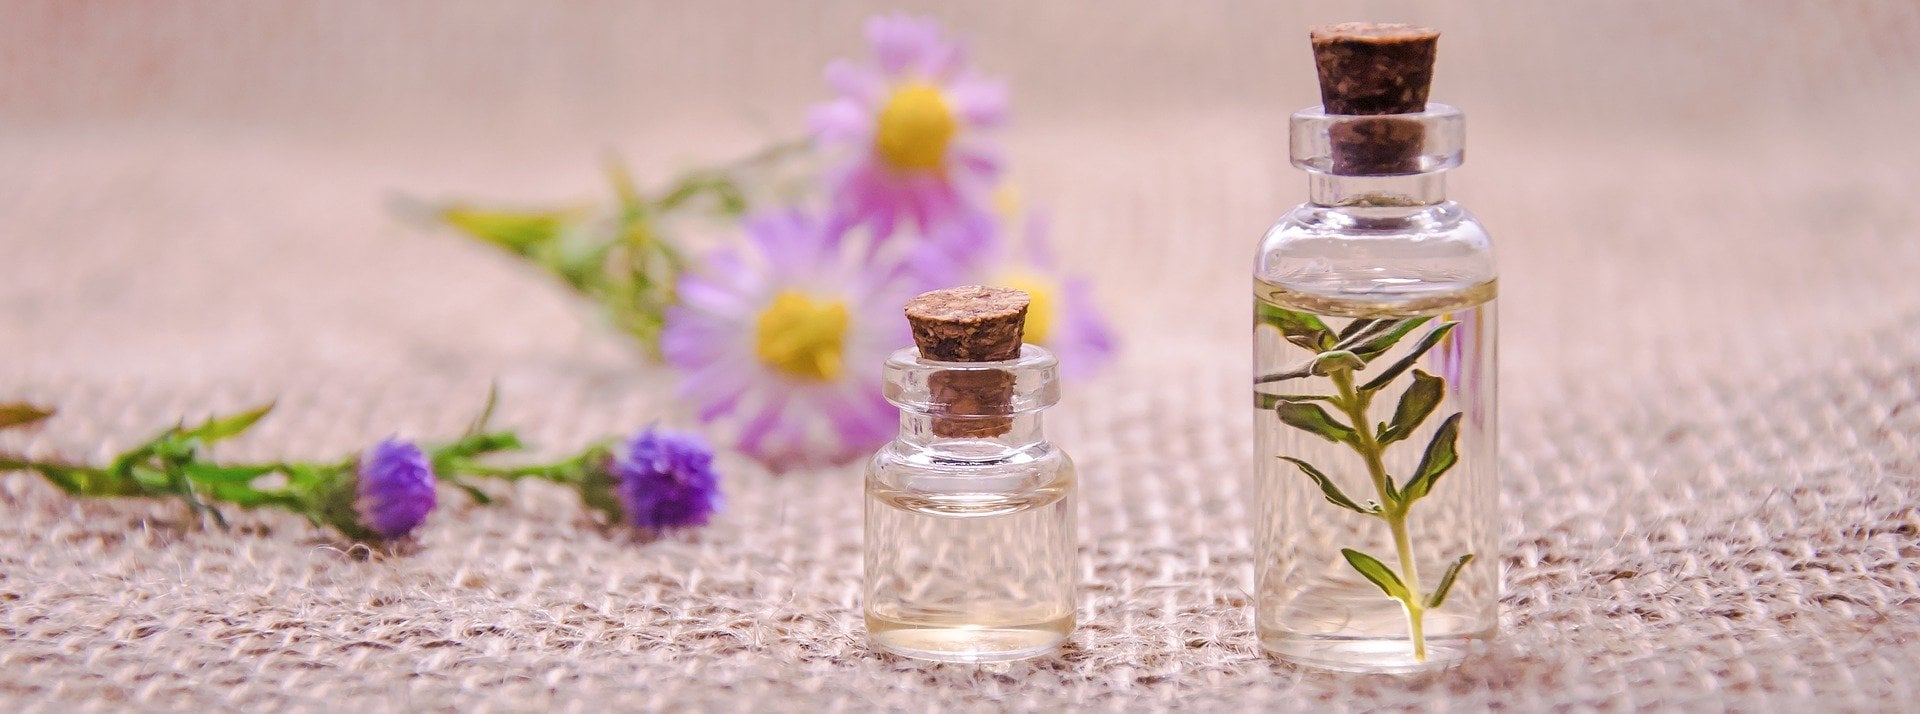 Two bottles of essential oil for aromatherapy